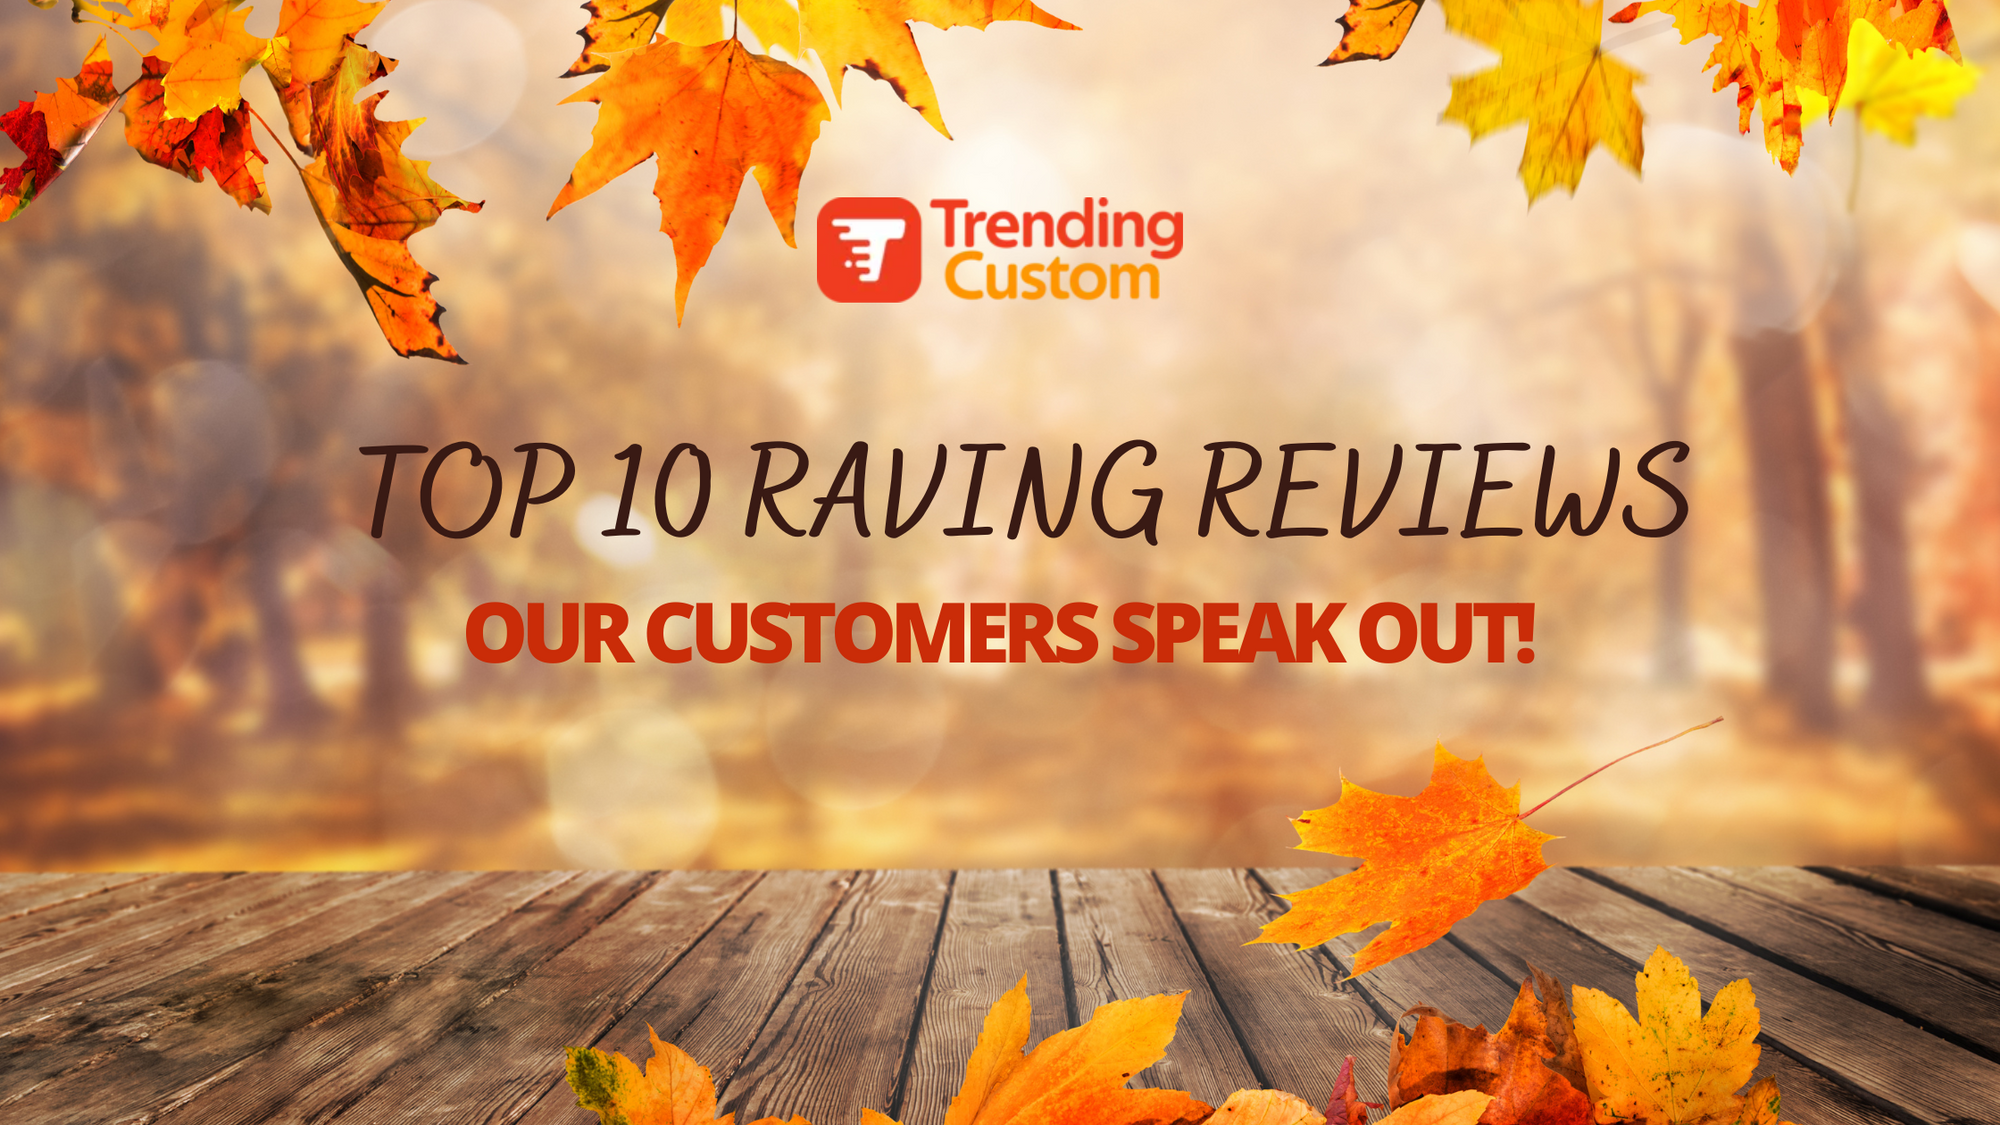 Top 10 Raving Reviews: Our Customers Speak Out! - September 11th